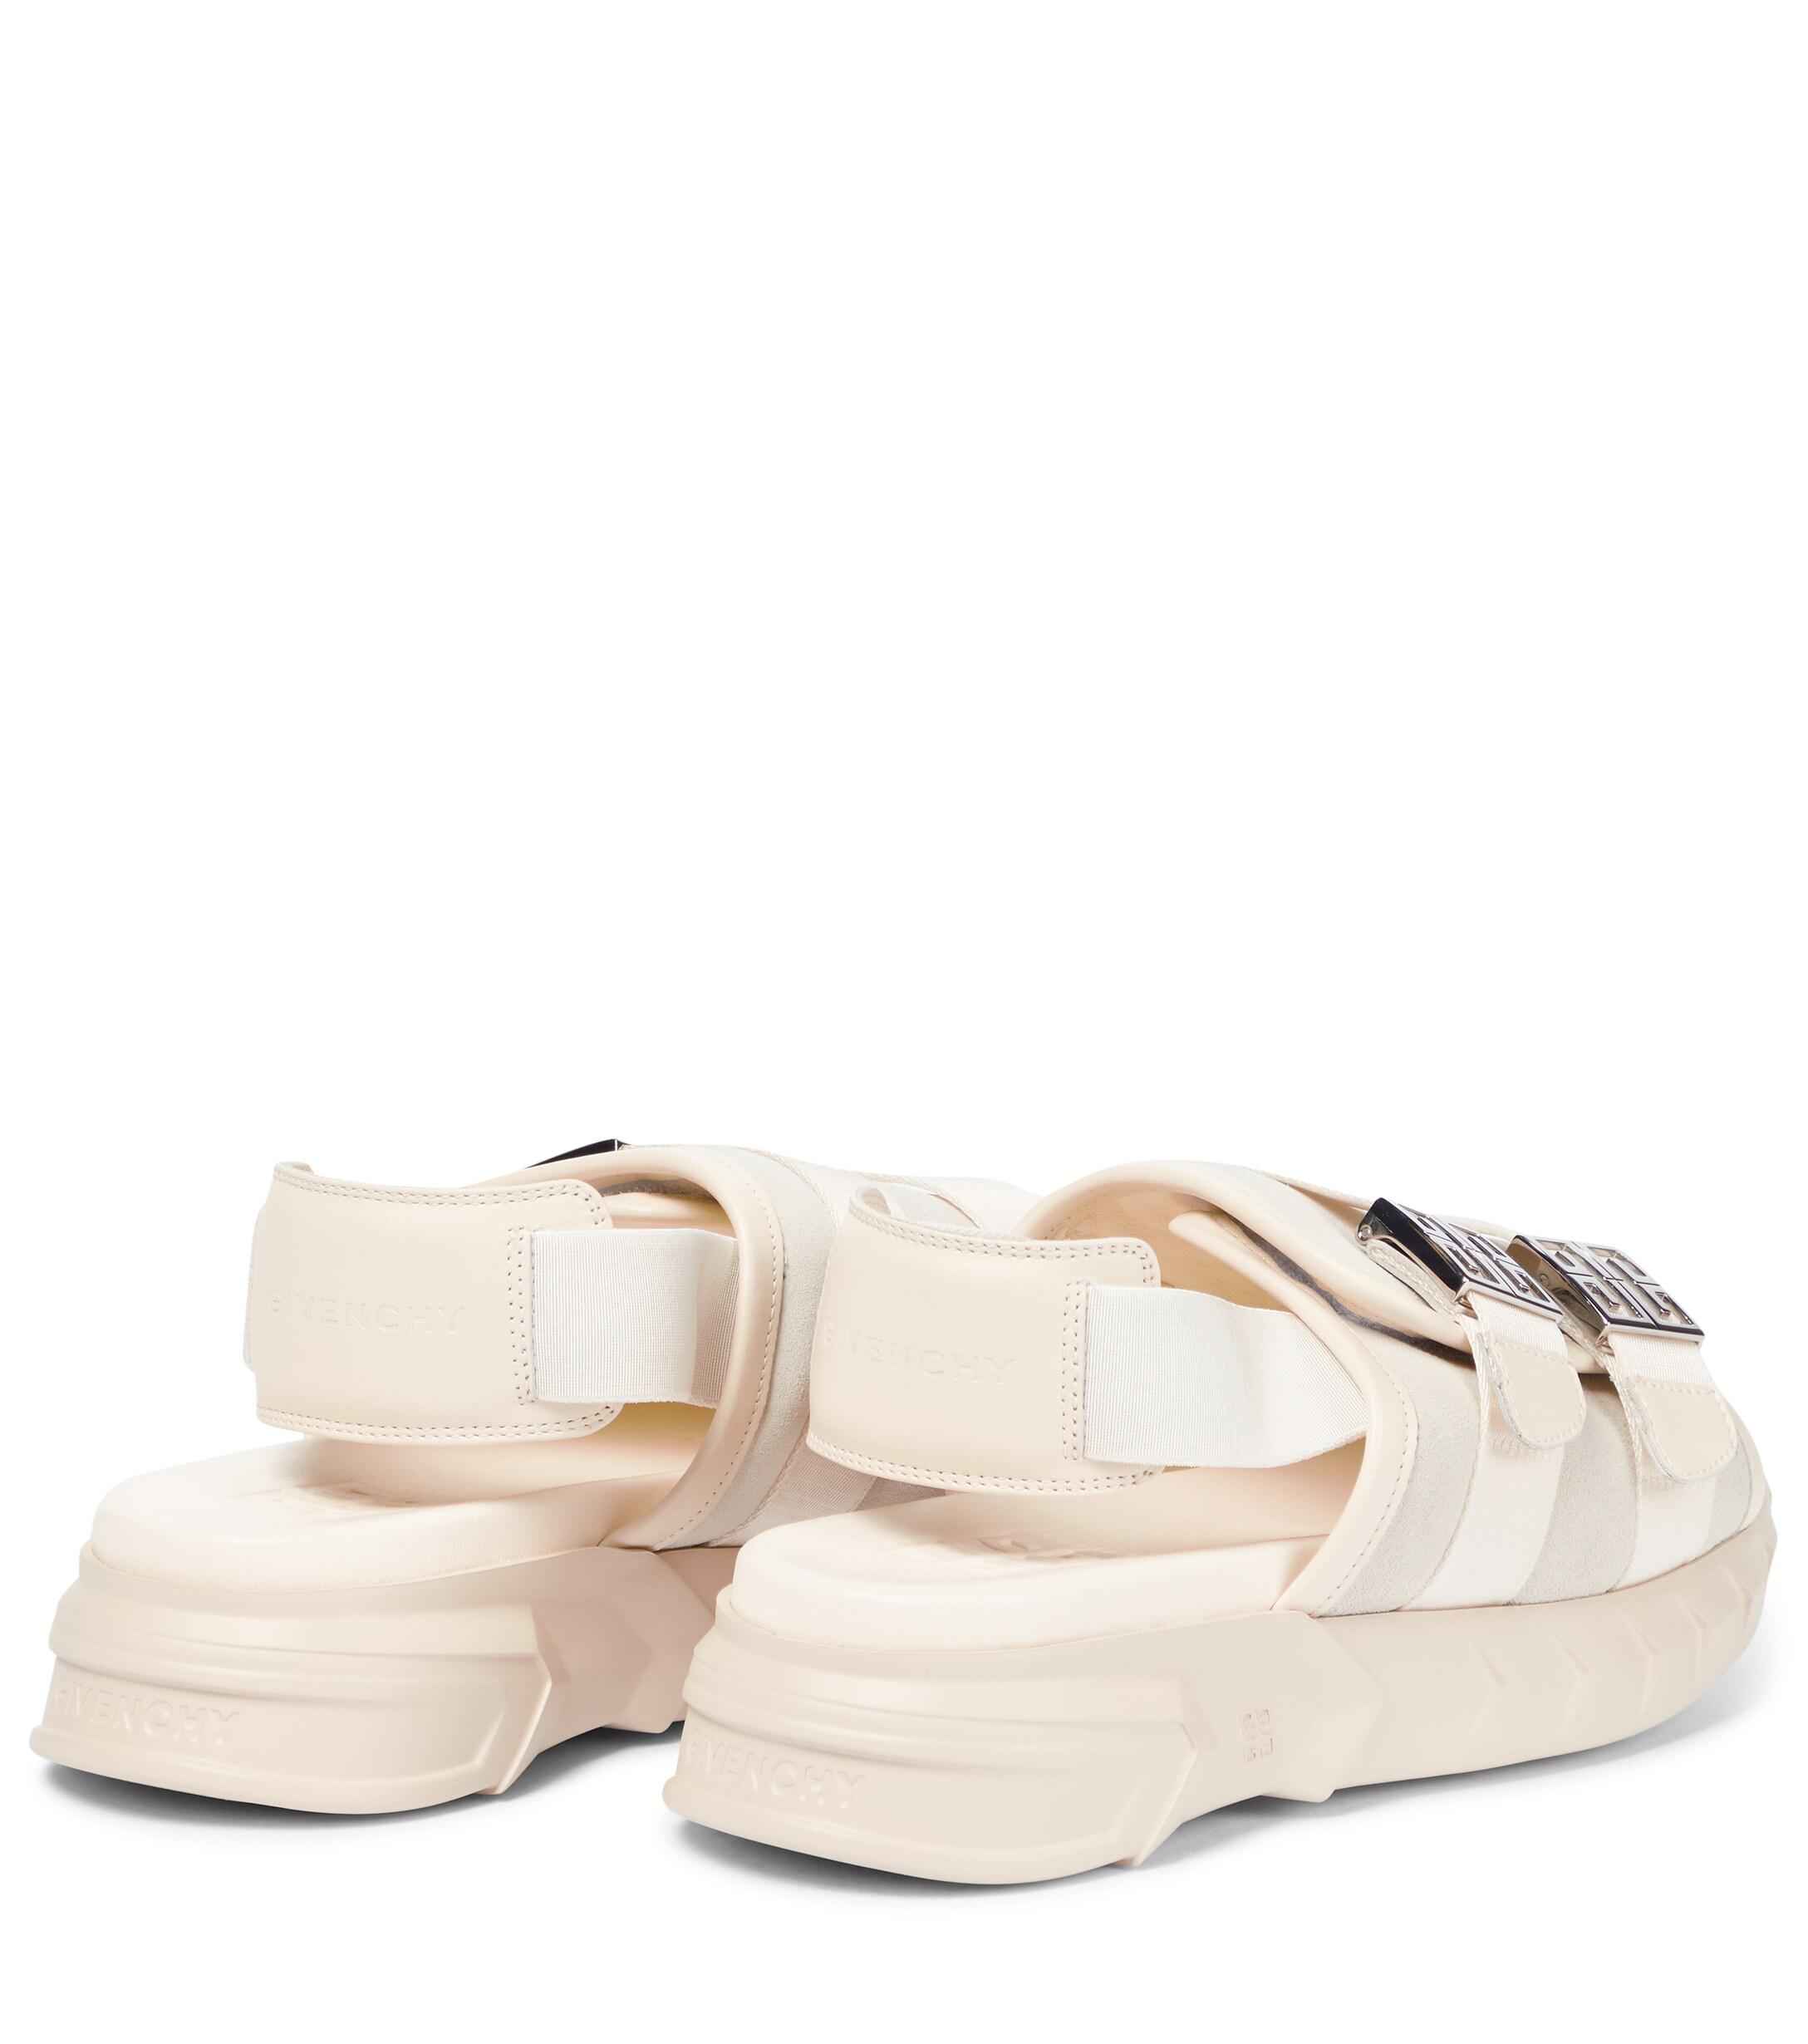 Marshmallow Suede And Leather Sandals